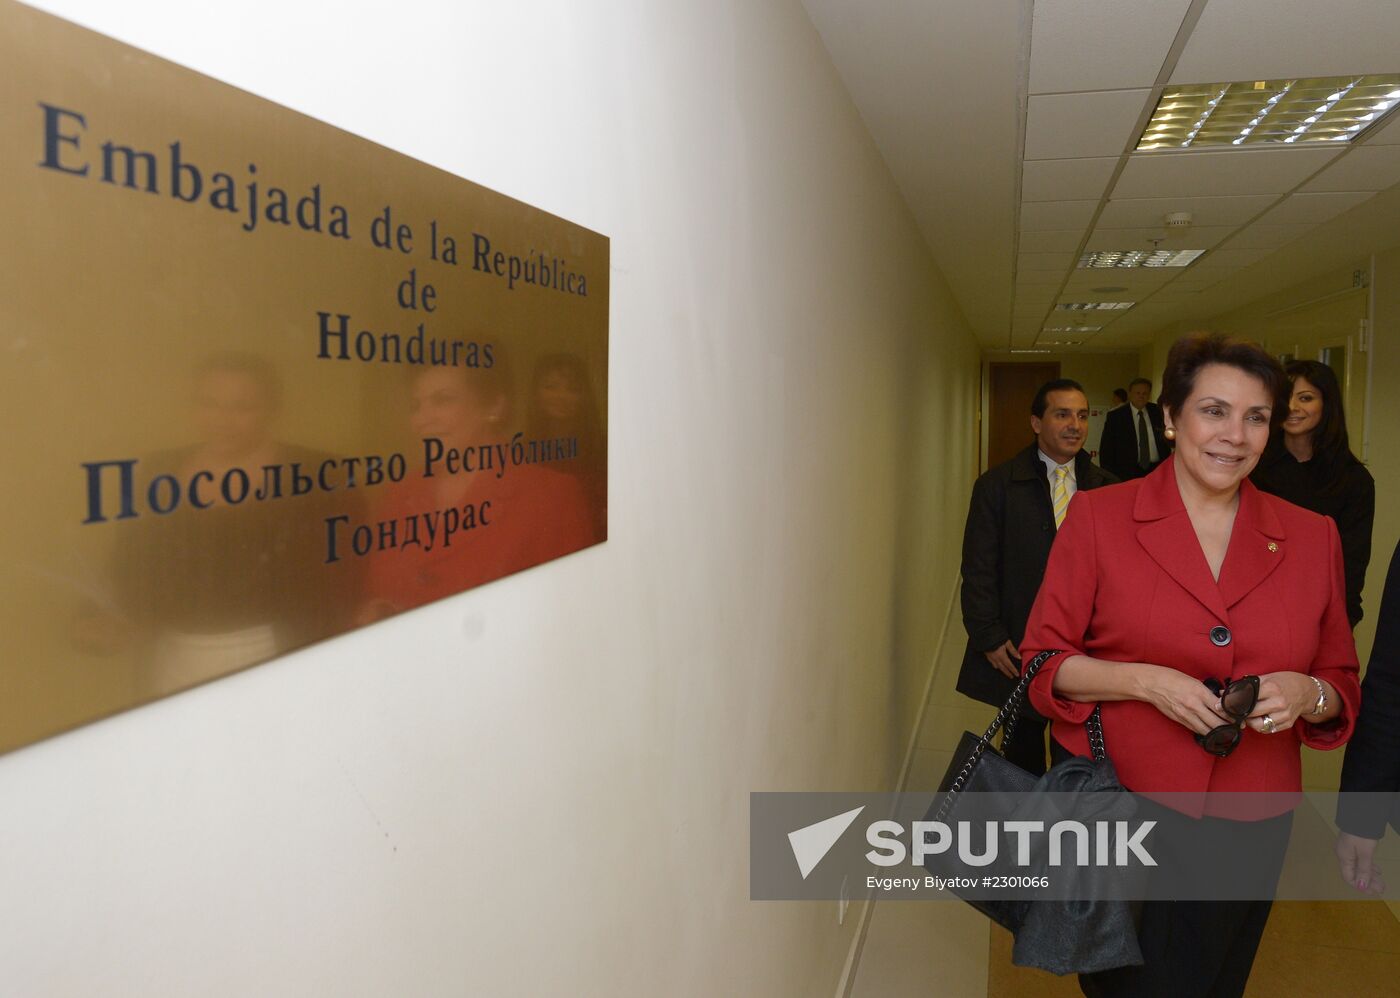 Embassy of Republic of Honduras opened in Moscow